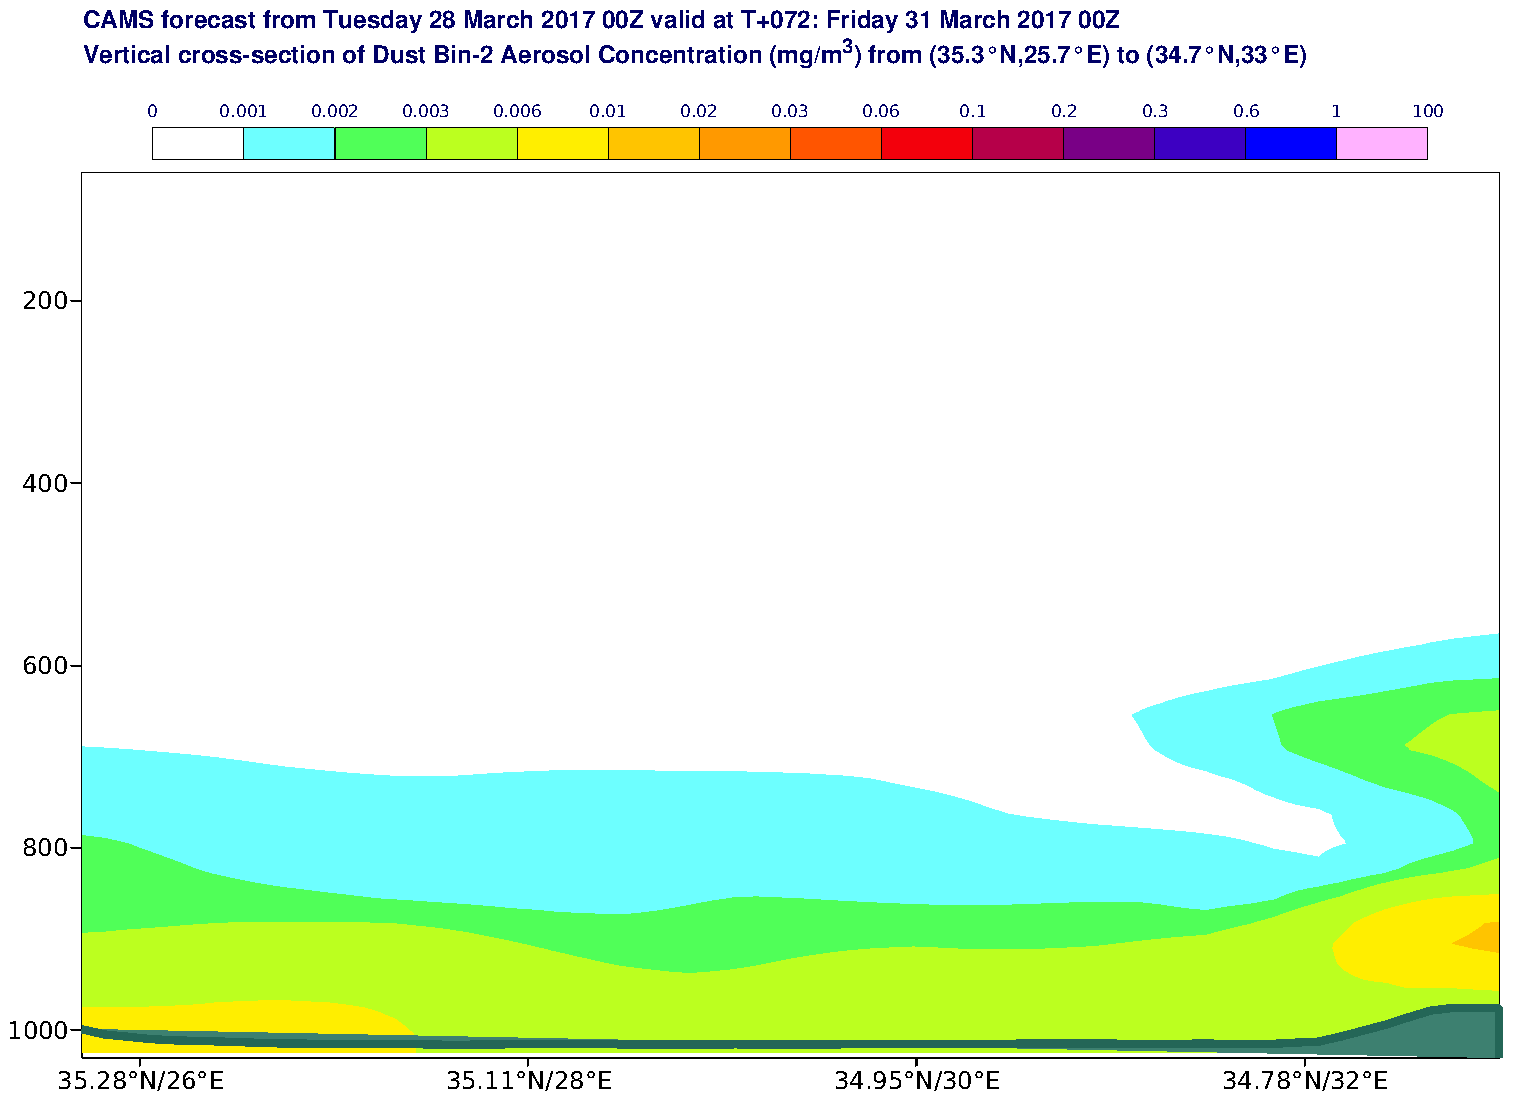 Vertical cross-section of Dust Bin-2 Aerosol Concentration (mg/m3) valid at T72 - 2017-03-31 00:00